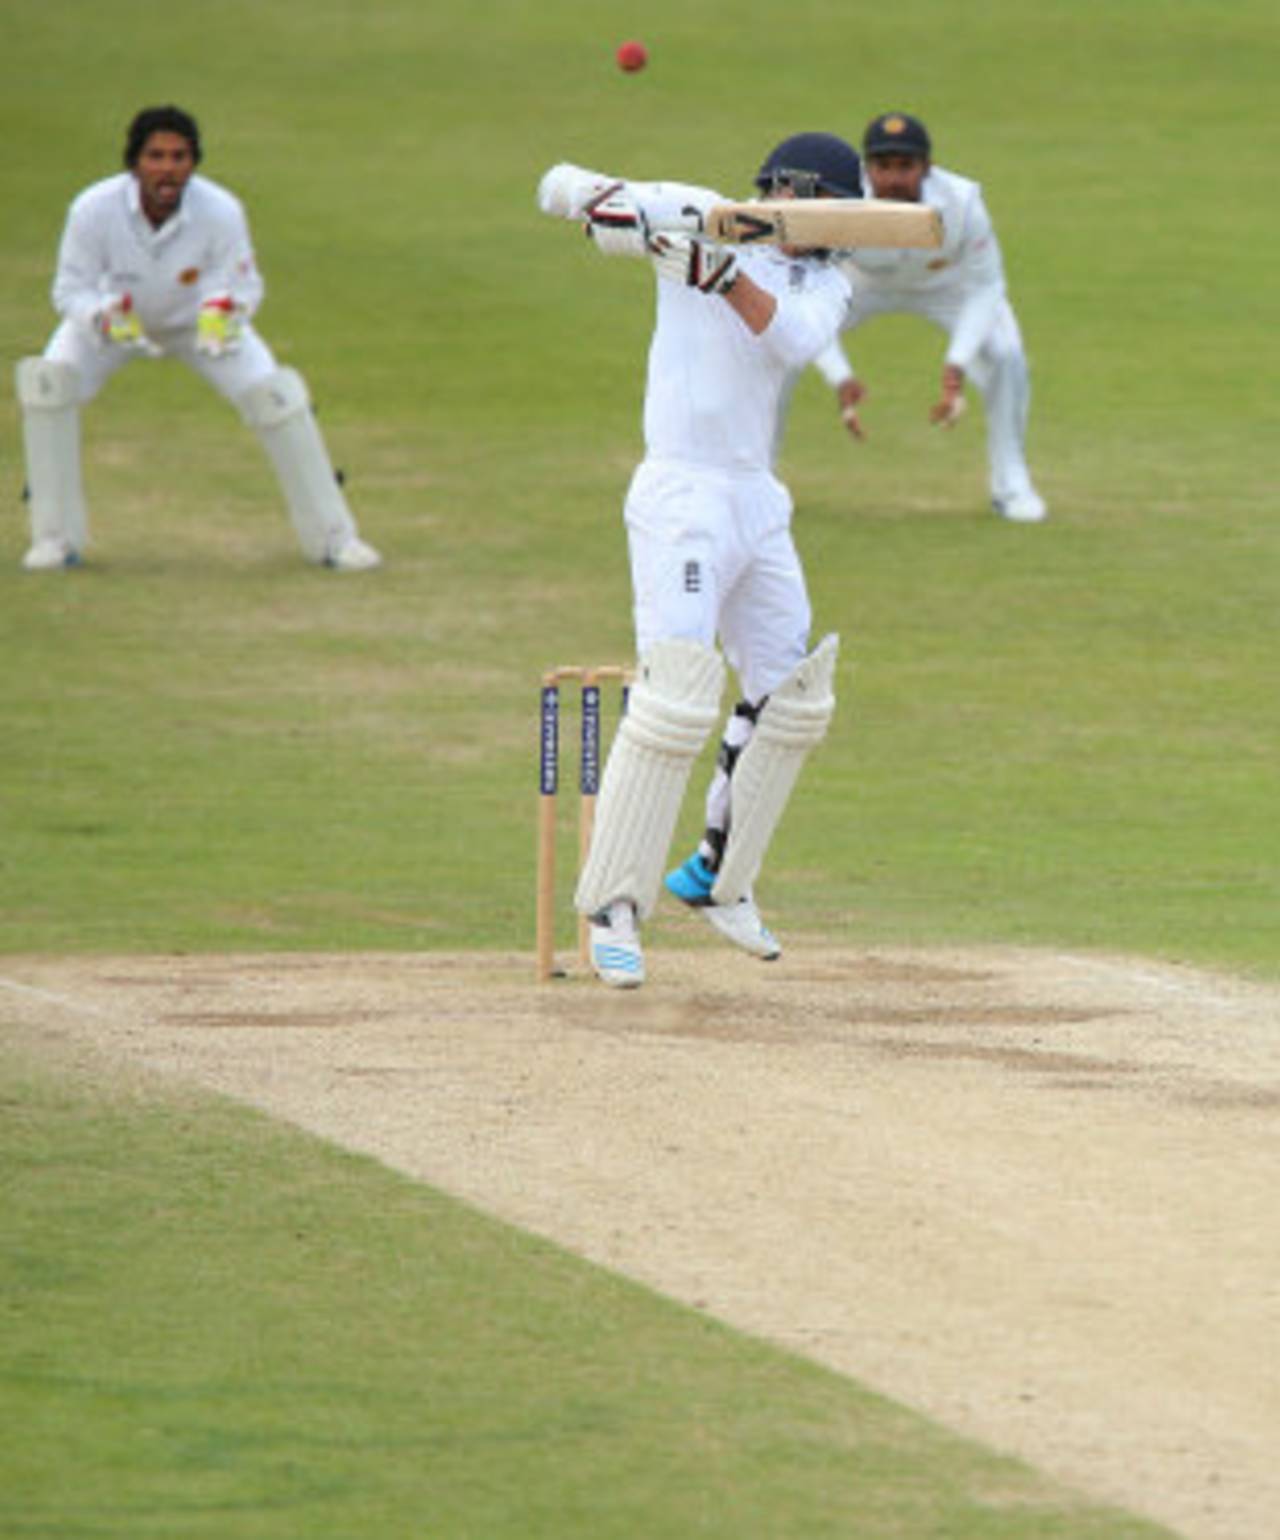 The penultimate ball of the Test flies off James Anderson's bat, England v Sri Lanka, 2nd Investec Test, Headingley, 5th day, June 24, 2014